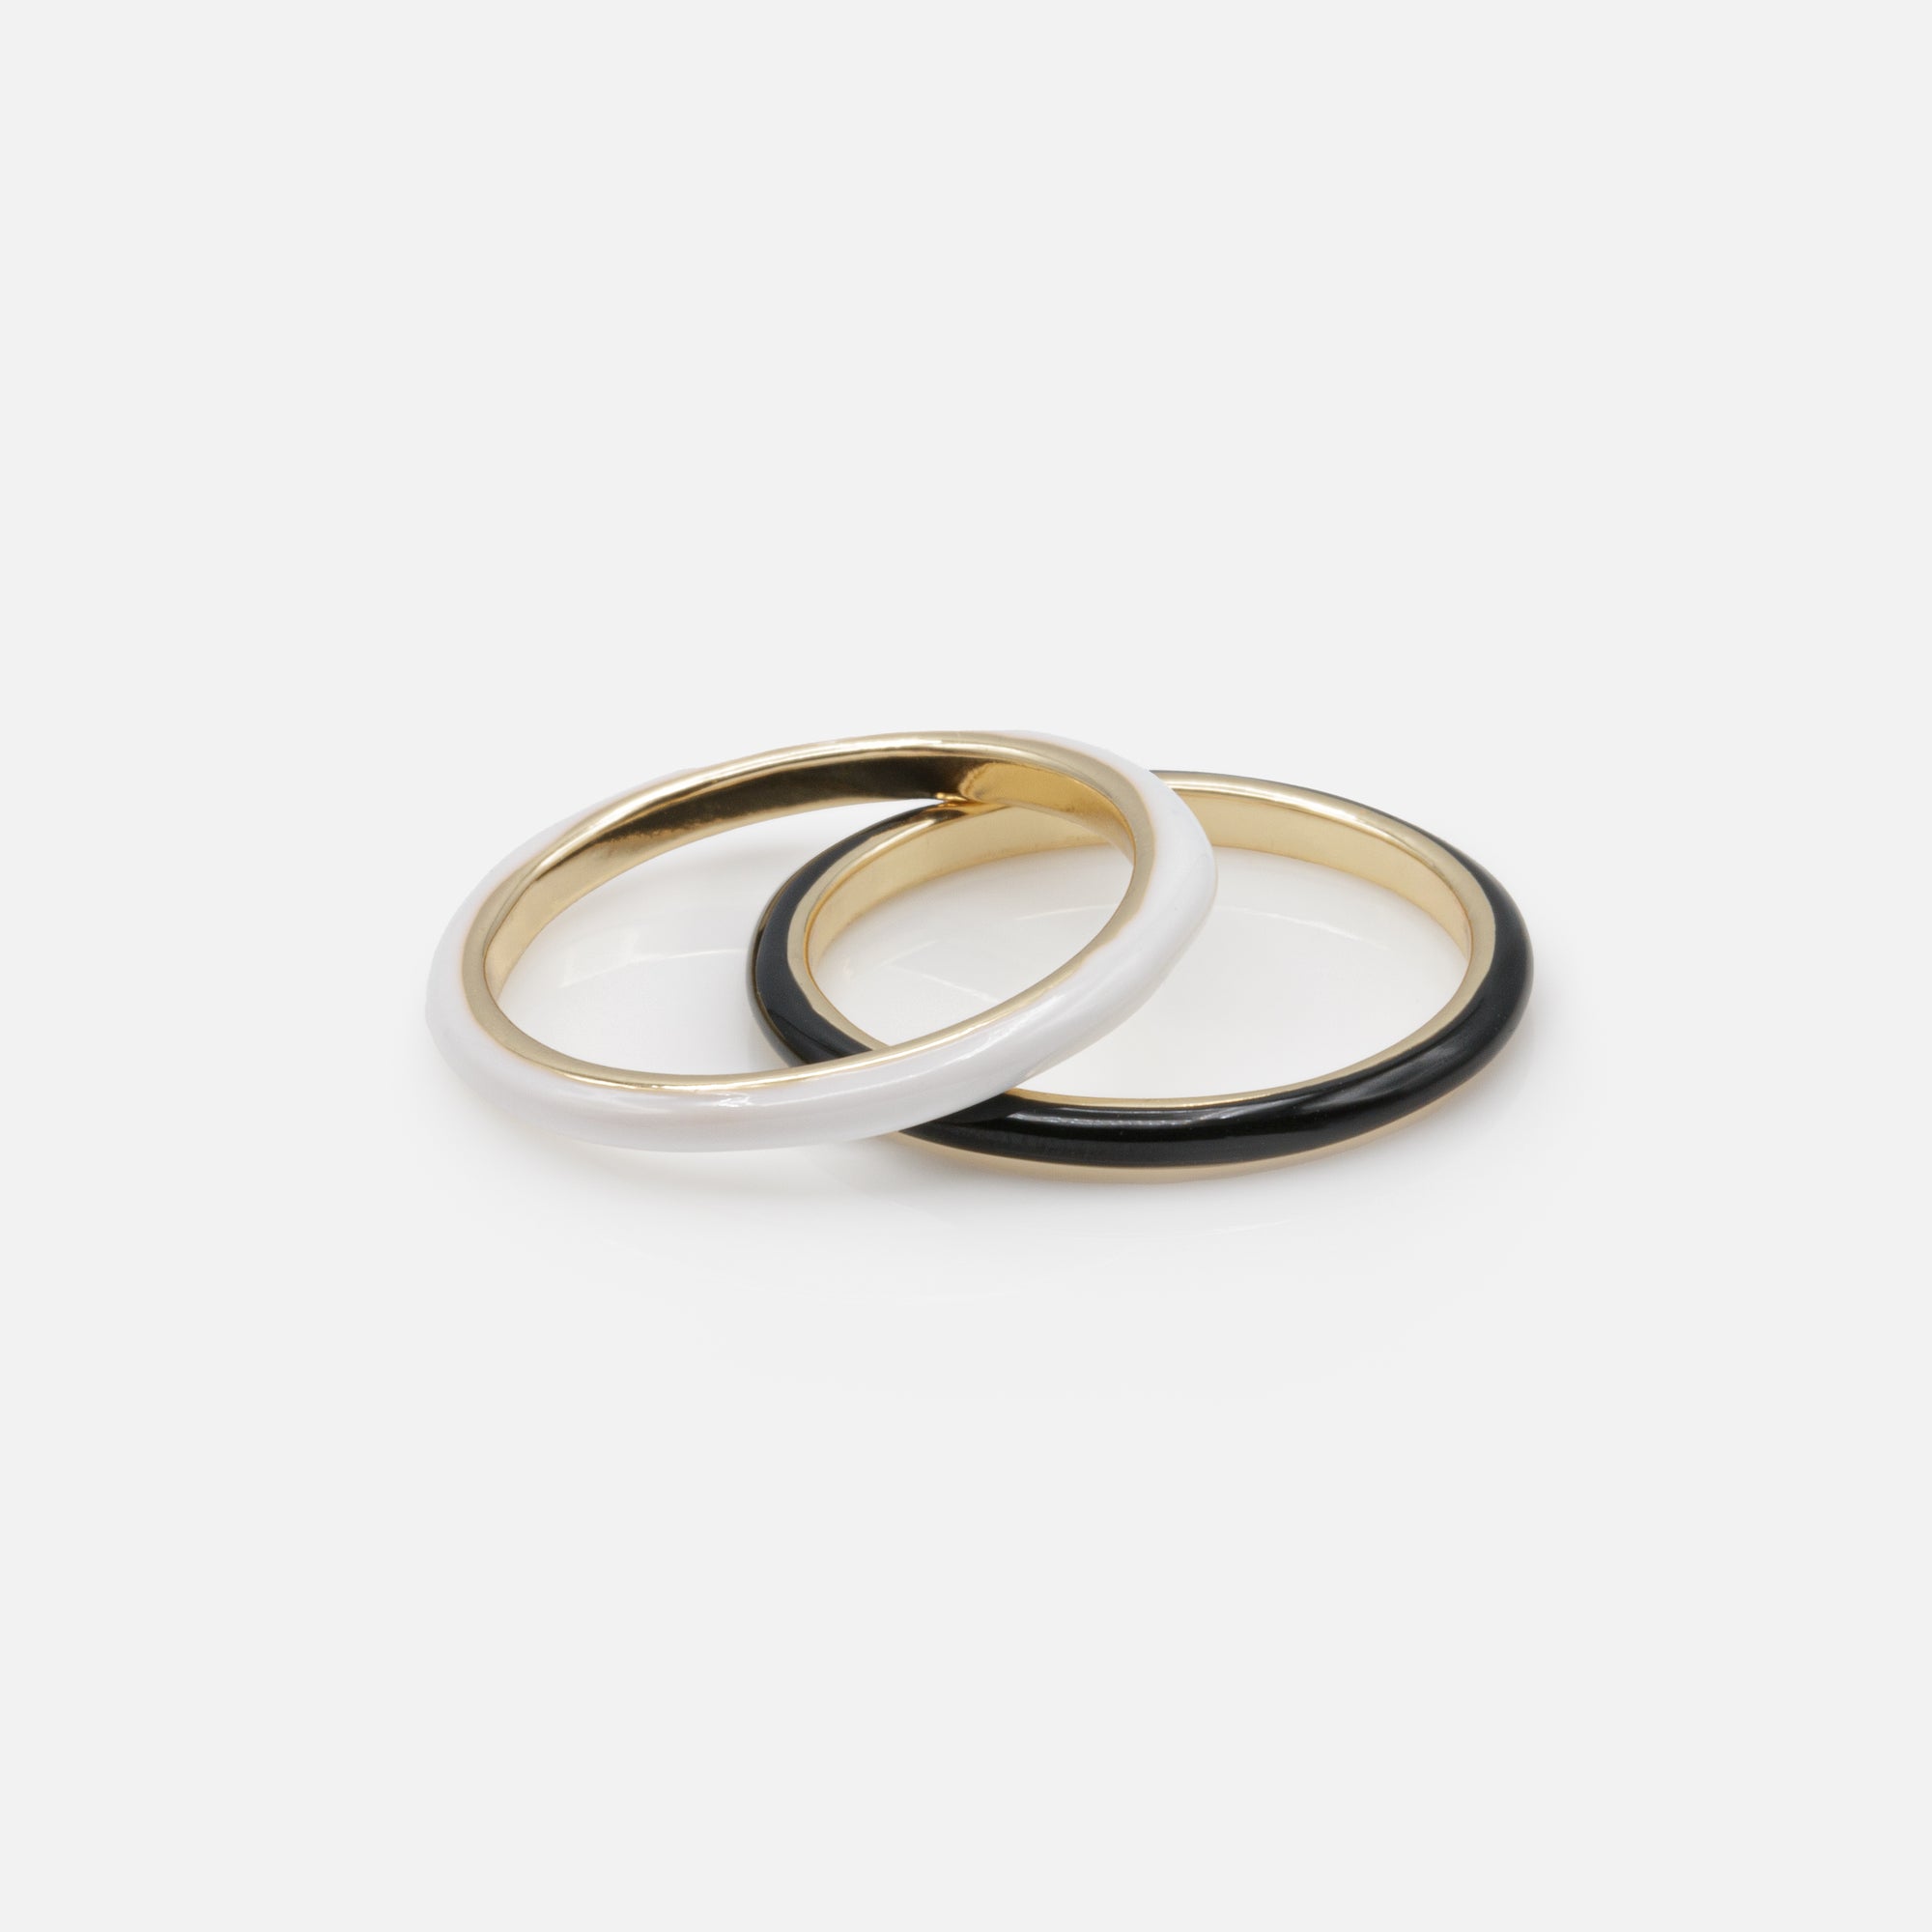 Duo of black and white gold rings